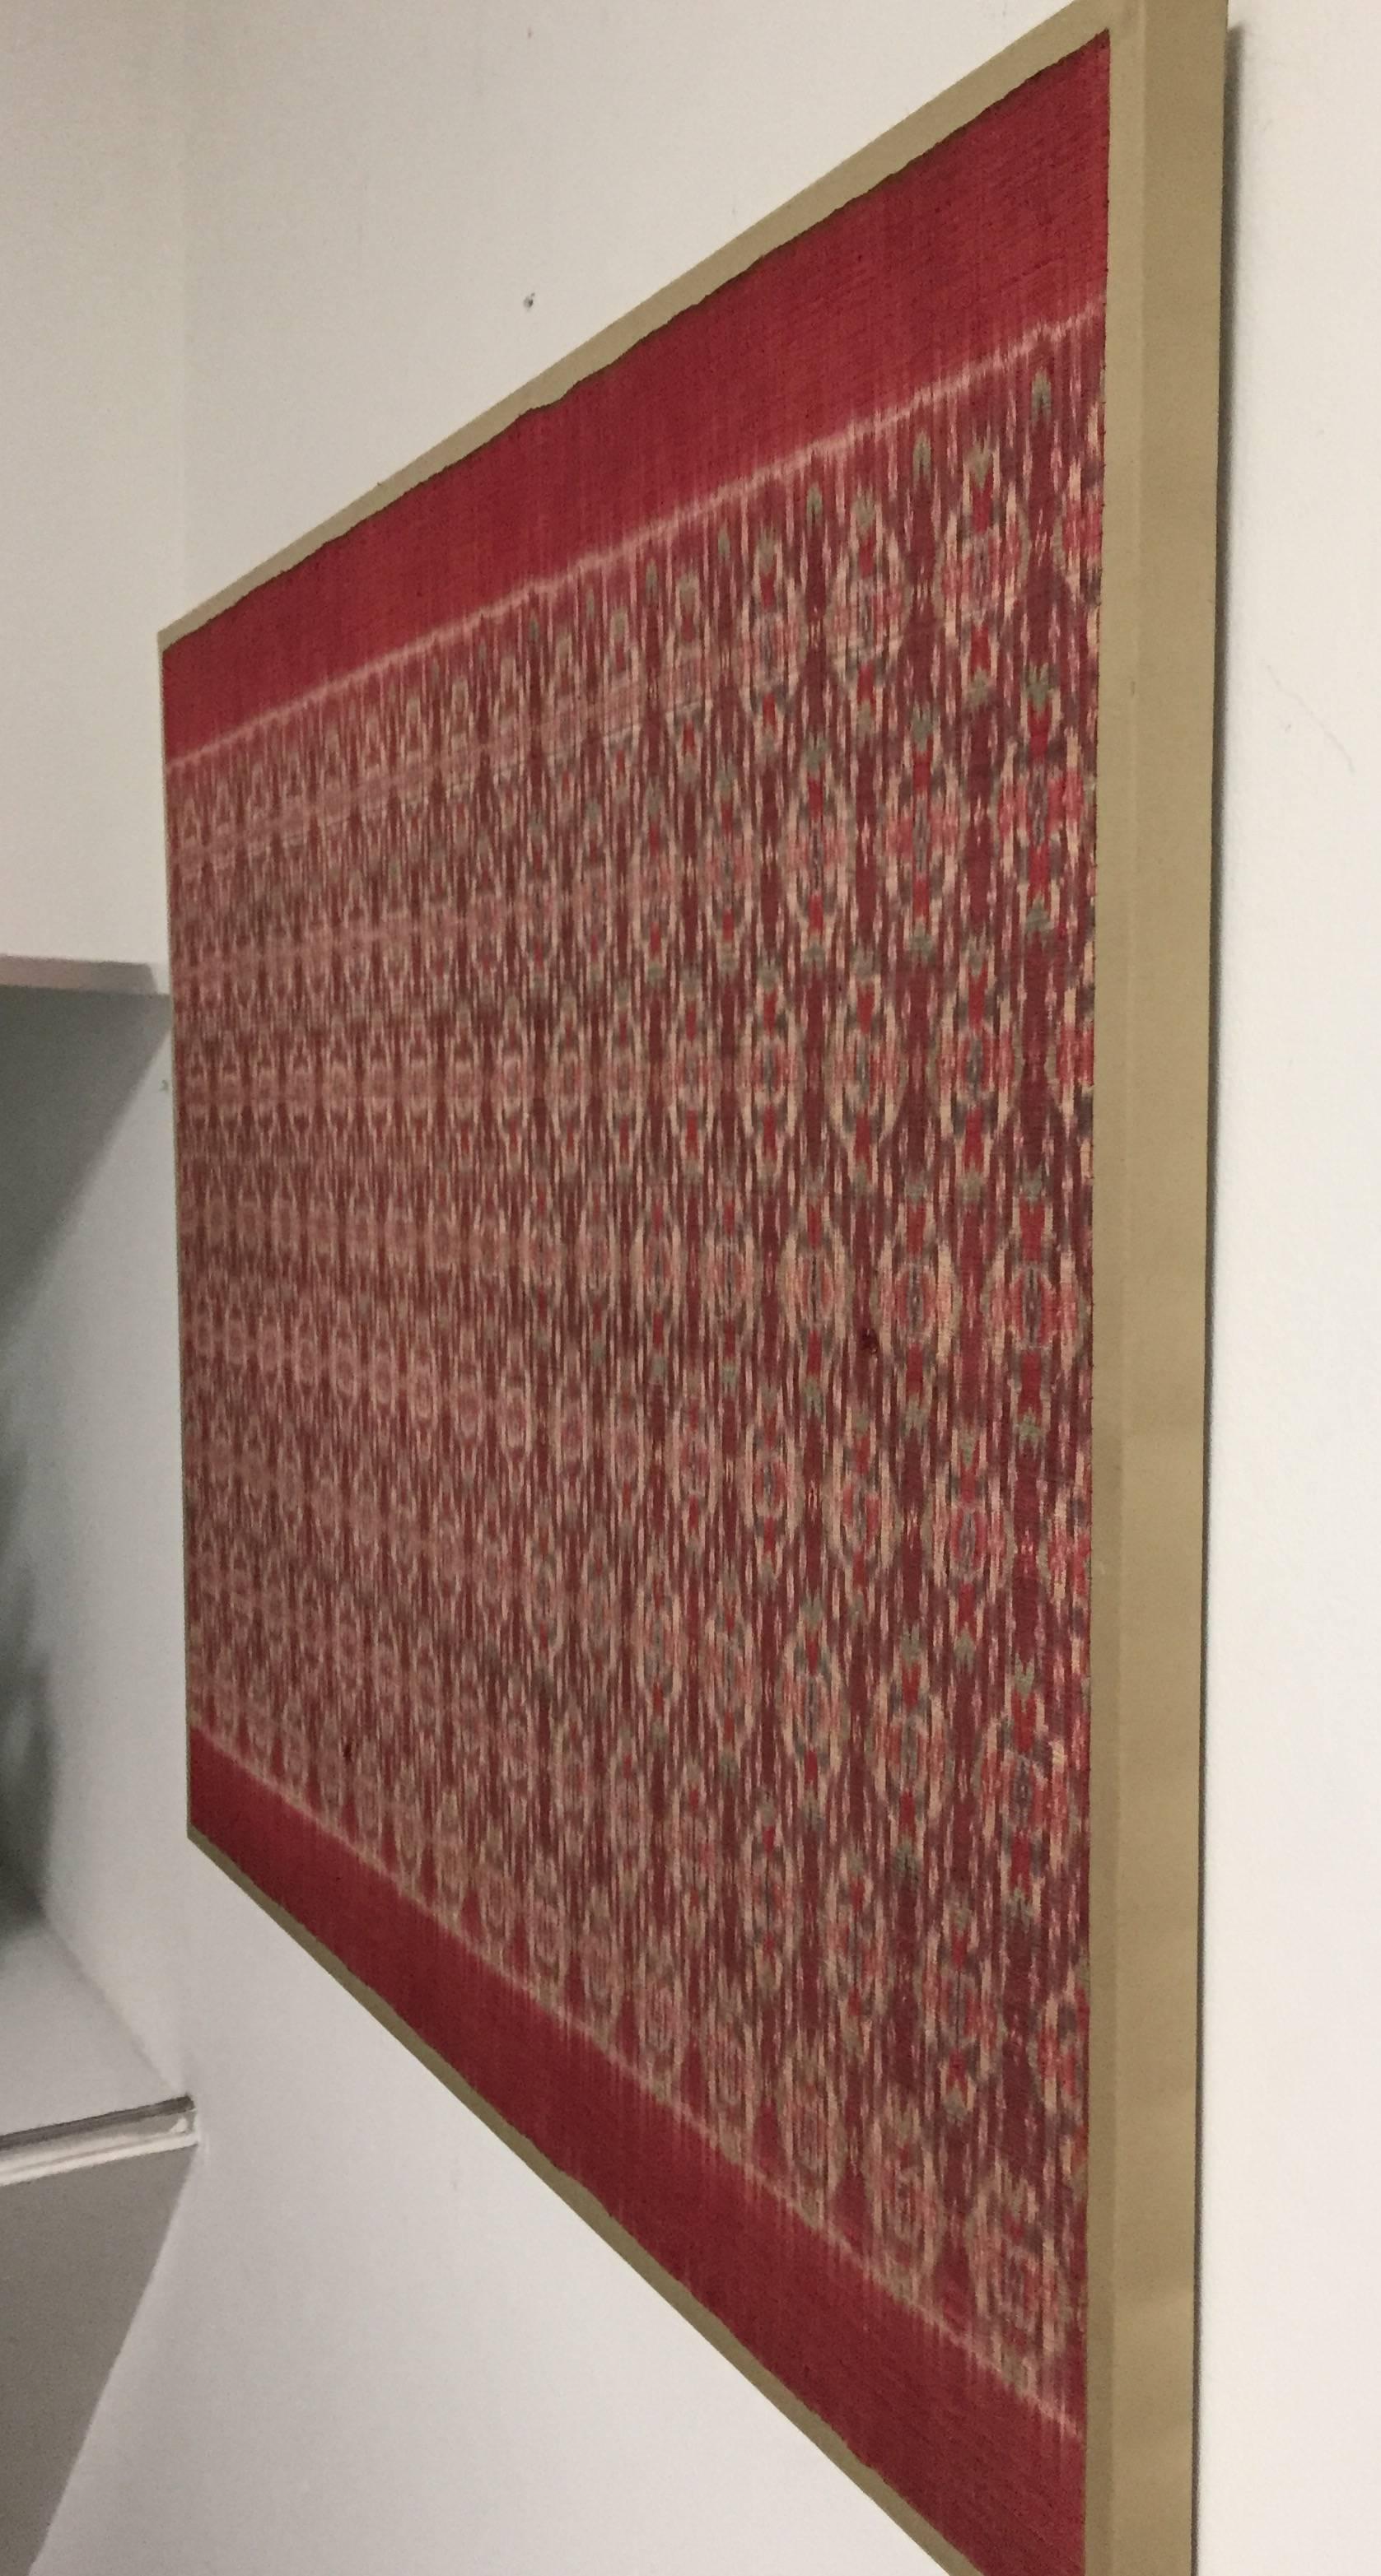 
A beautiful woven 19th century textile Ikat fragment from Indonesia.
All natural dies.
Mounted on a hard canvas backing.
*item is on sale, and will expire at end of August.
J R Richards
3107956812


